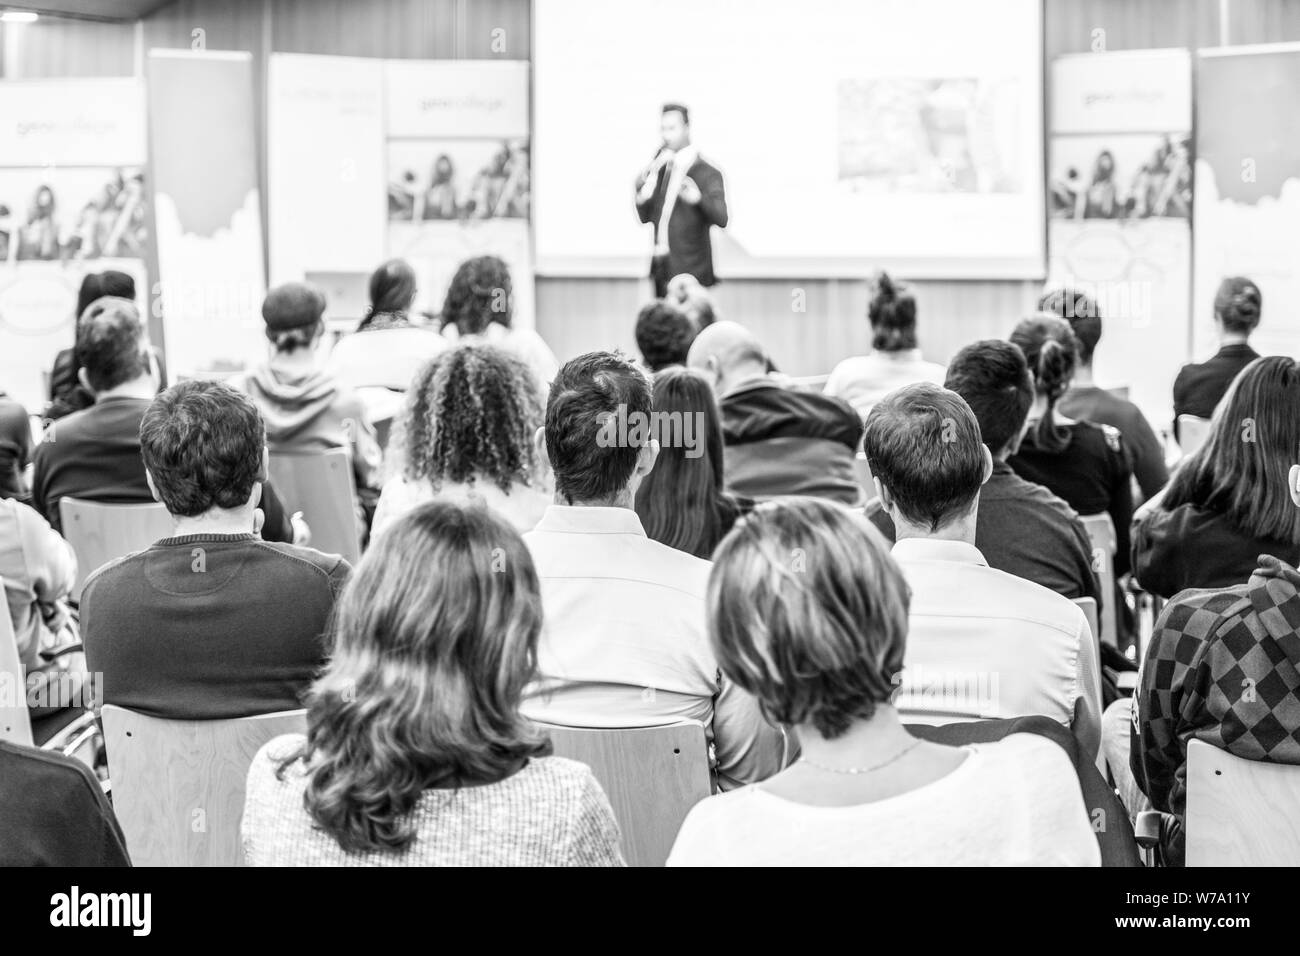 Business speaker giving a talk at business conference event. Stock Photo